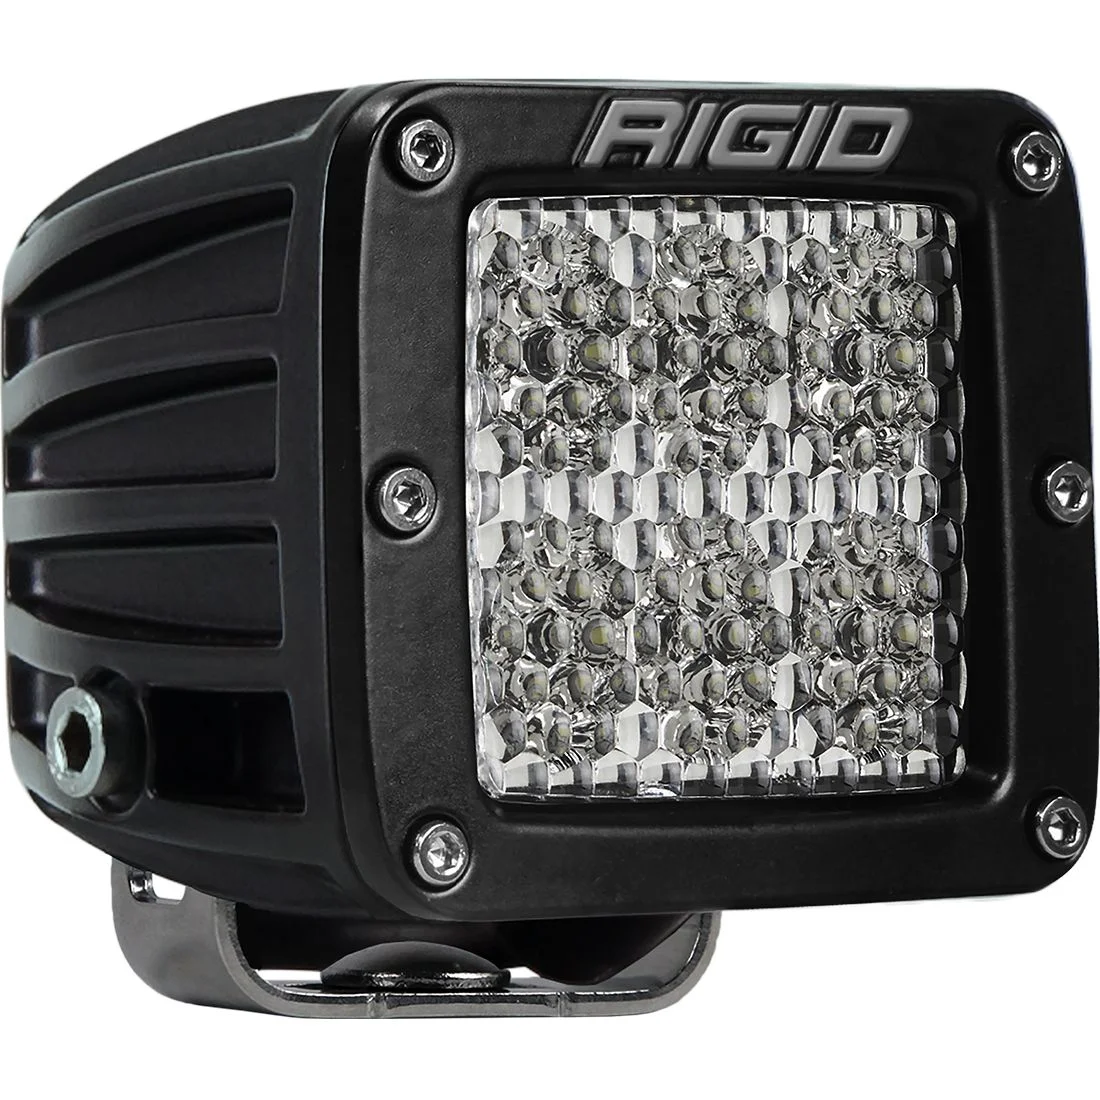 SINGLE Rigid D-Series PRO OFFROAD Surface Mount Light Pods (SOLD IN SINGLES)